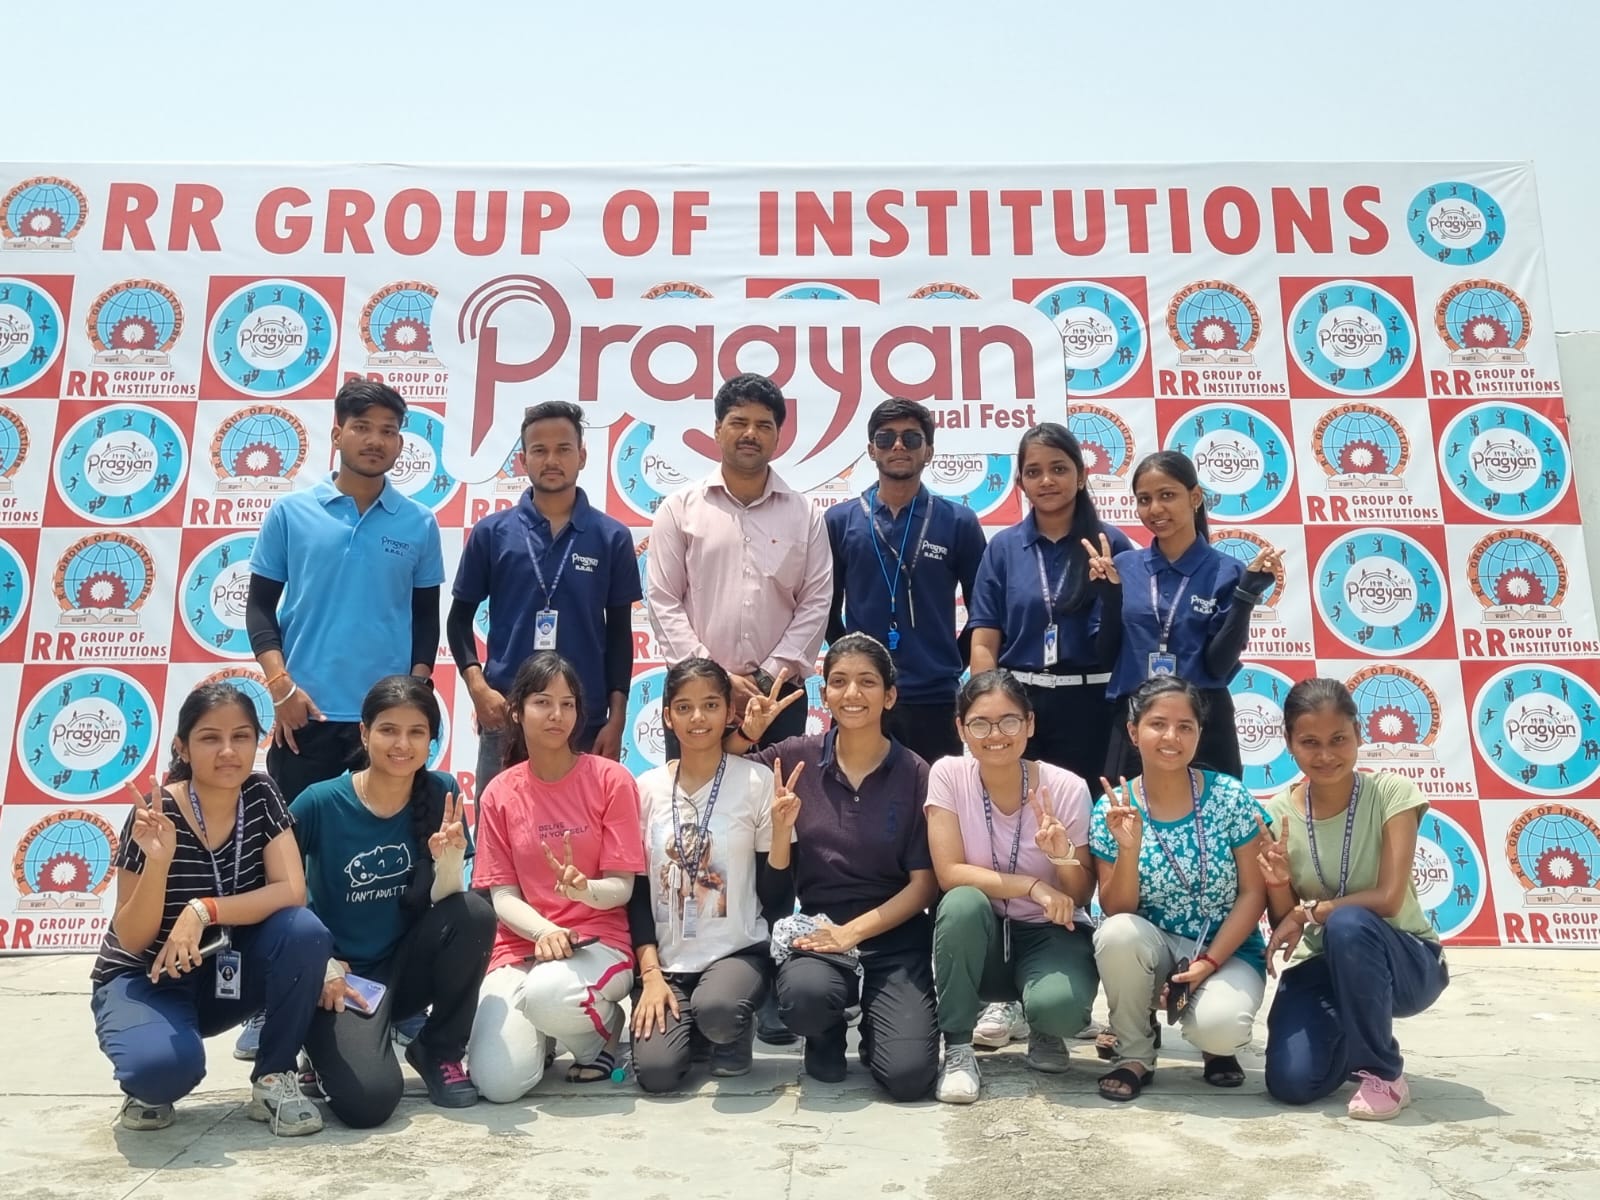 Second day of the ongoing annual festival Pragyan 2024 at R.R. Group of Institutions.